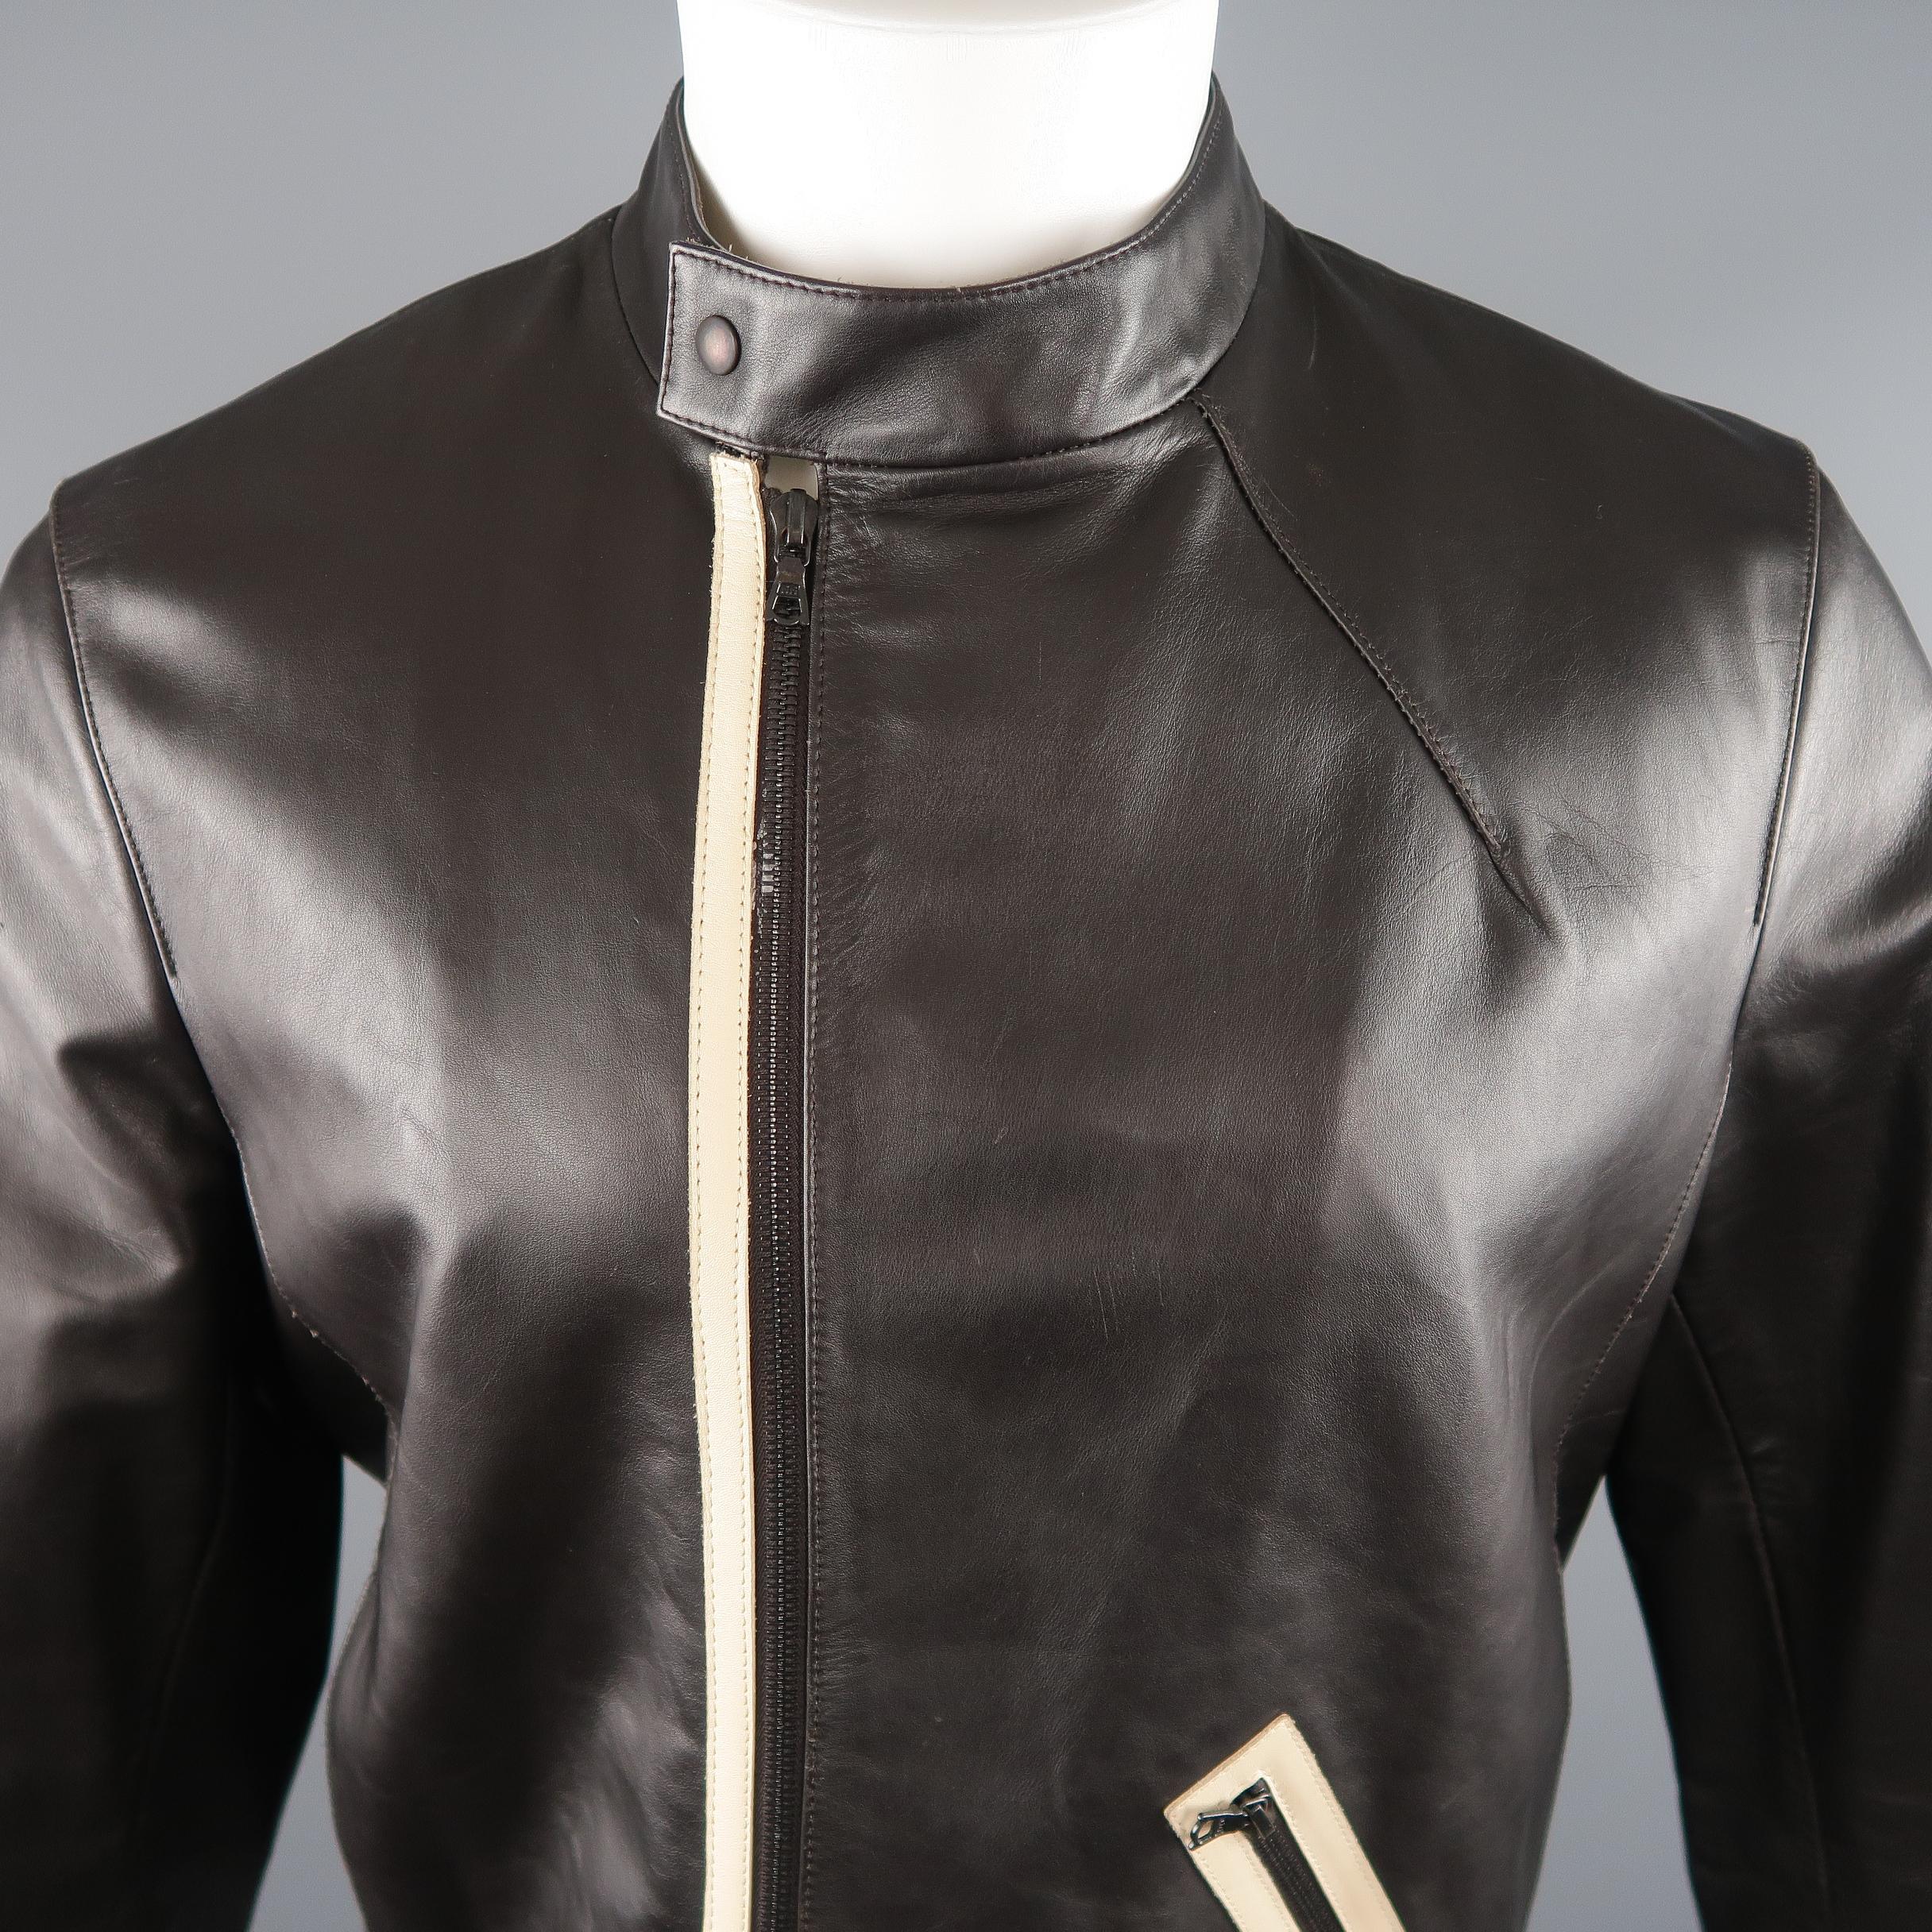 NEIL BARRET Motorcycle Jacket comes in a brown tone in a solid leather material, with a cream trim, zip pocket, zip up and snaps. Minor wear throughout. Made in Italy. Retail price $ 2,195.00. 
 
Very Good Pre-Owned Condition.
Marked: M
